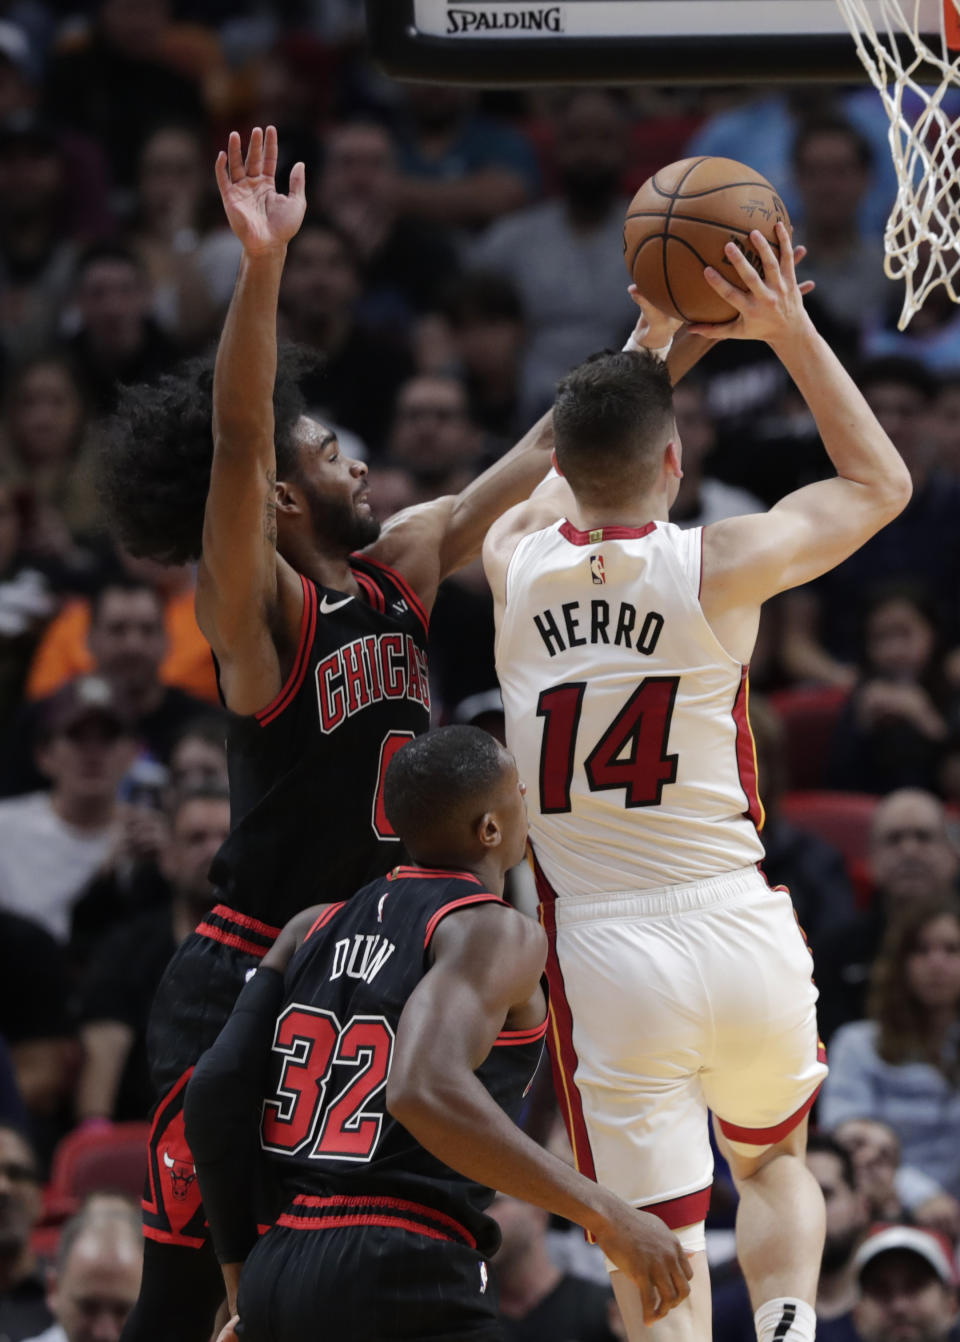 Miami Heat guard Tyler Herro (14) goes to the basket as Chicago Bulls guard Coby White (0) defends during the first half of an NBA basketball game, Sunday, Dec. 8, 2019, in Miami. (AP Photo/Lynne Sladky)